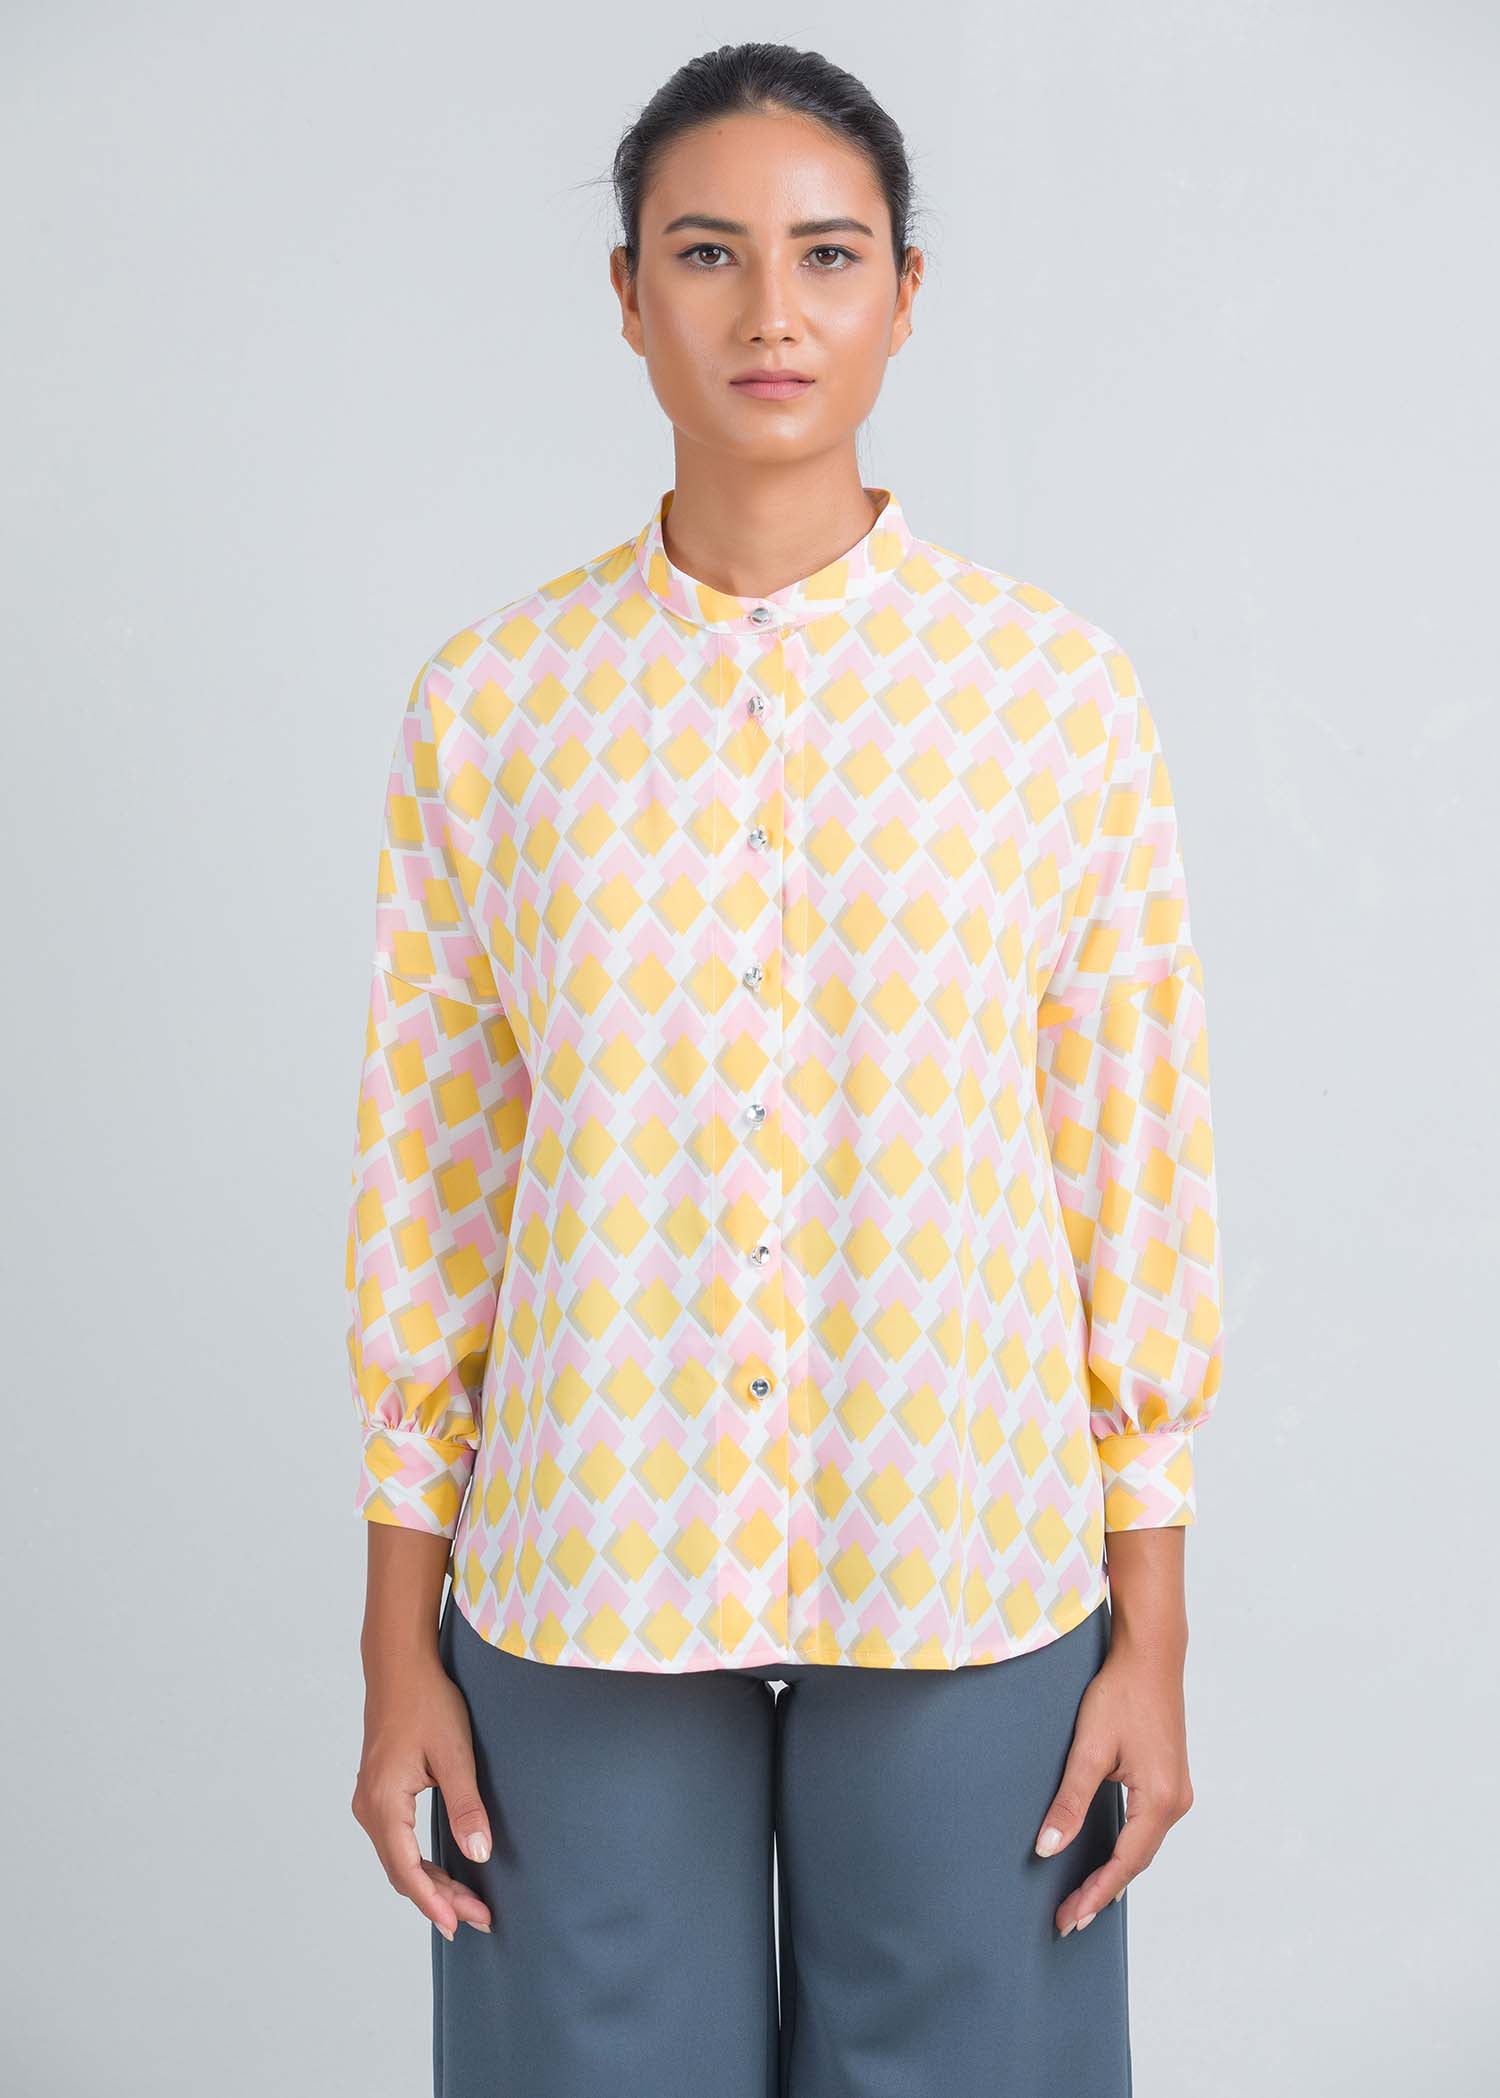 Printed blouse with drop shoulder